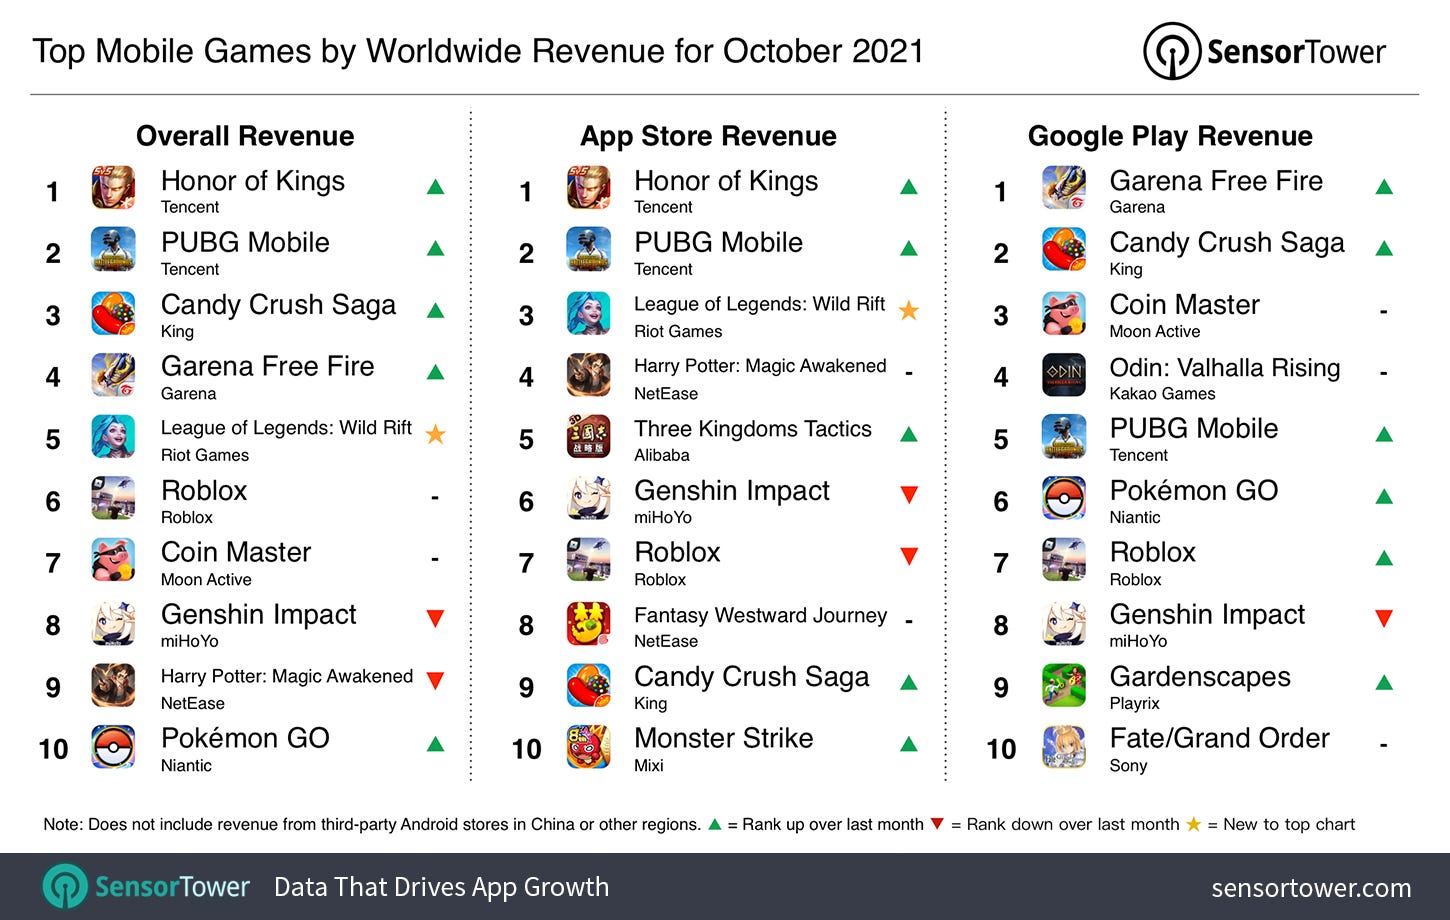 “Top Grossing Mobile Games Worldwide for October 2021